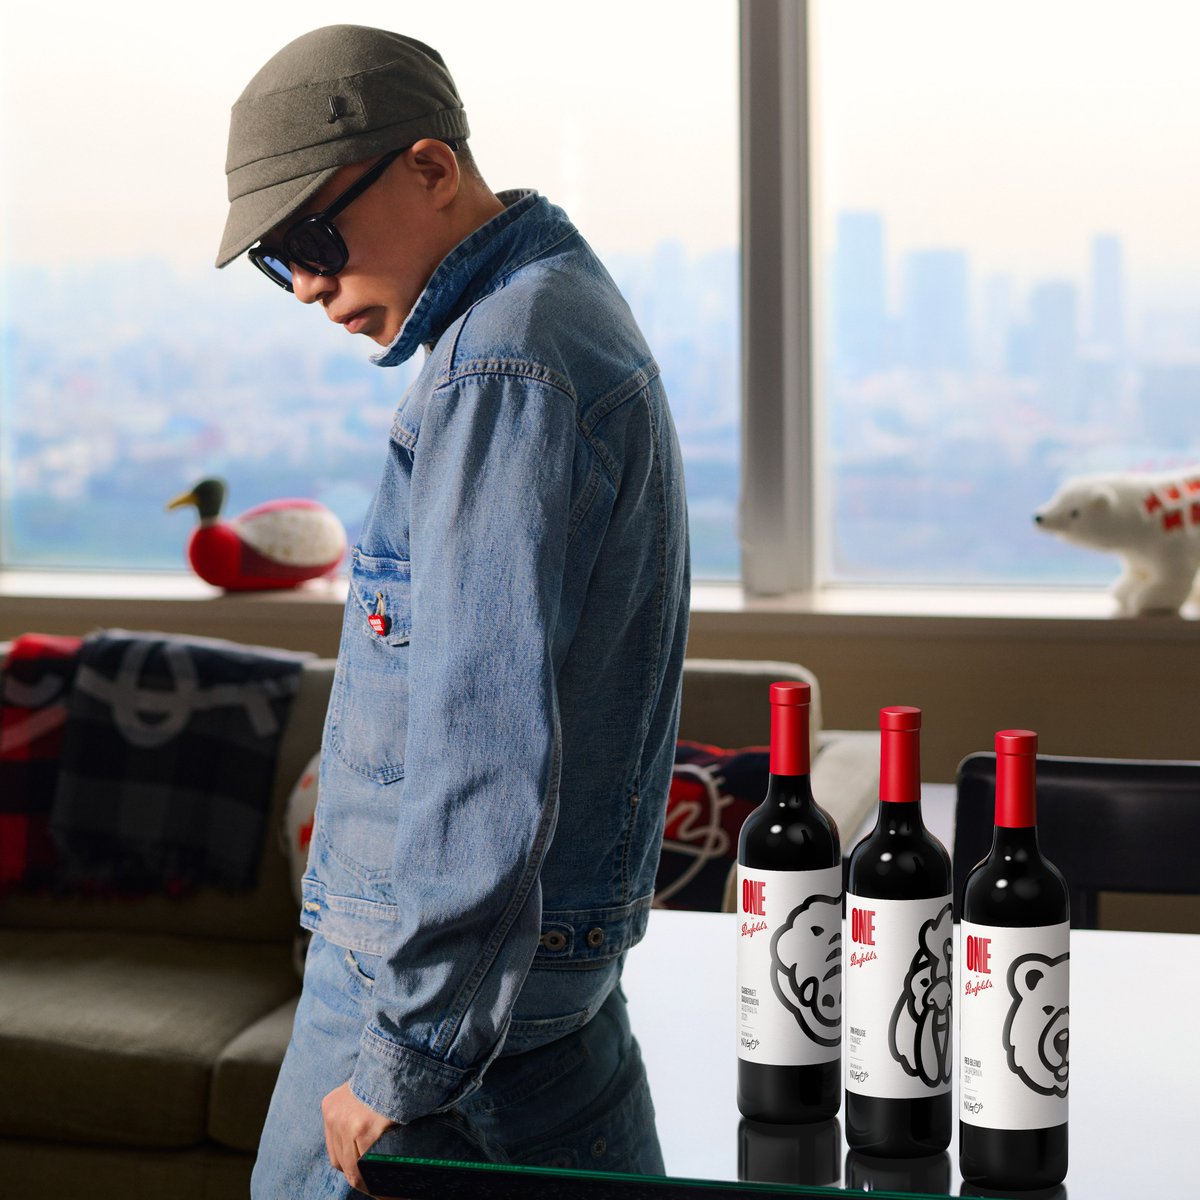 Penfolds is delighted to welcome NIGO as our first Creative Partner. The multi-year relationship will see NIGO lead the creative vision for selected projects, beginning with the global release of One by Penfolds – a new range of wines celebrating ‘oneness’.